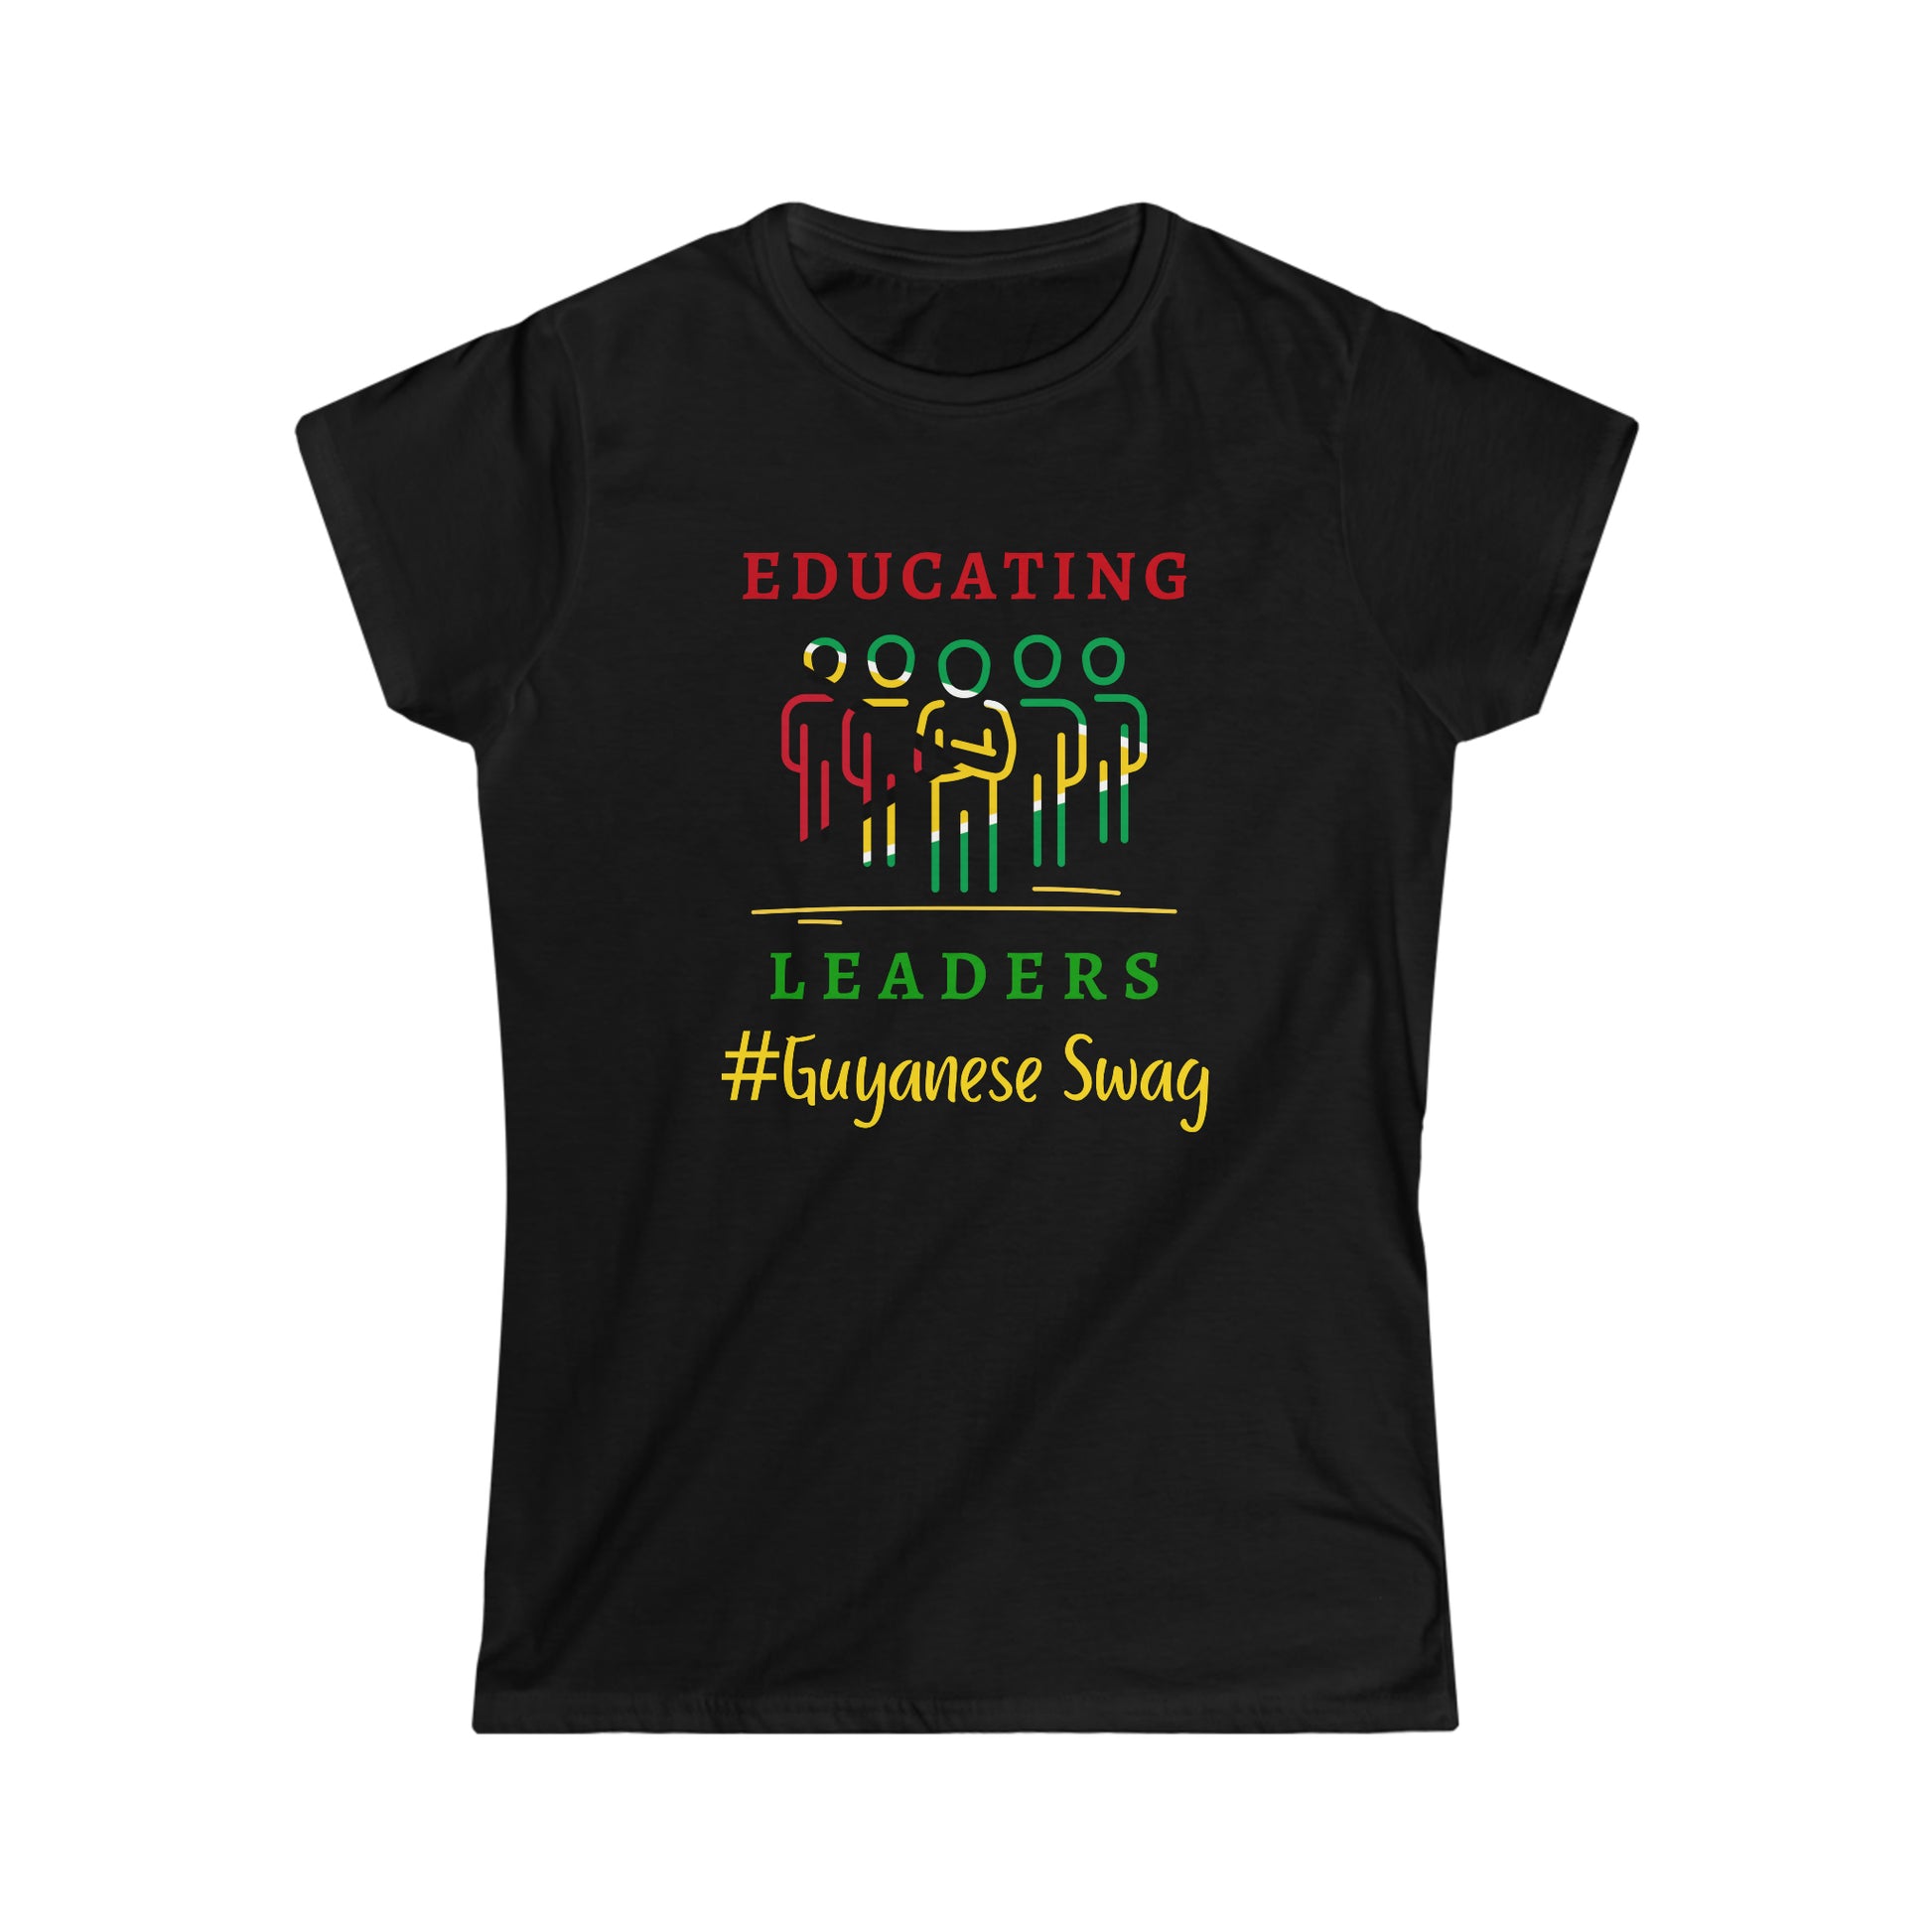 Educating Leaders woman's black softstyle tee by Guyanese Swag.